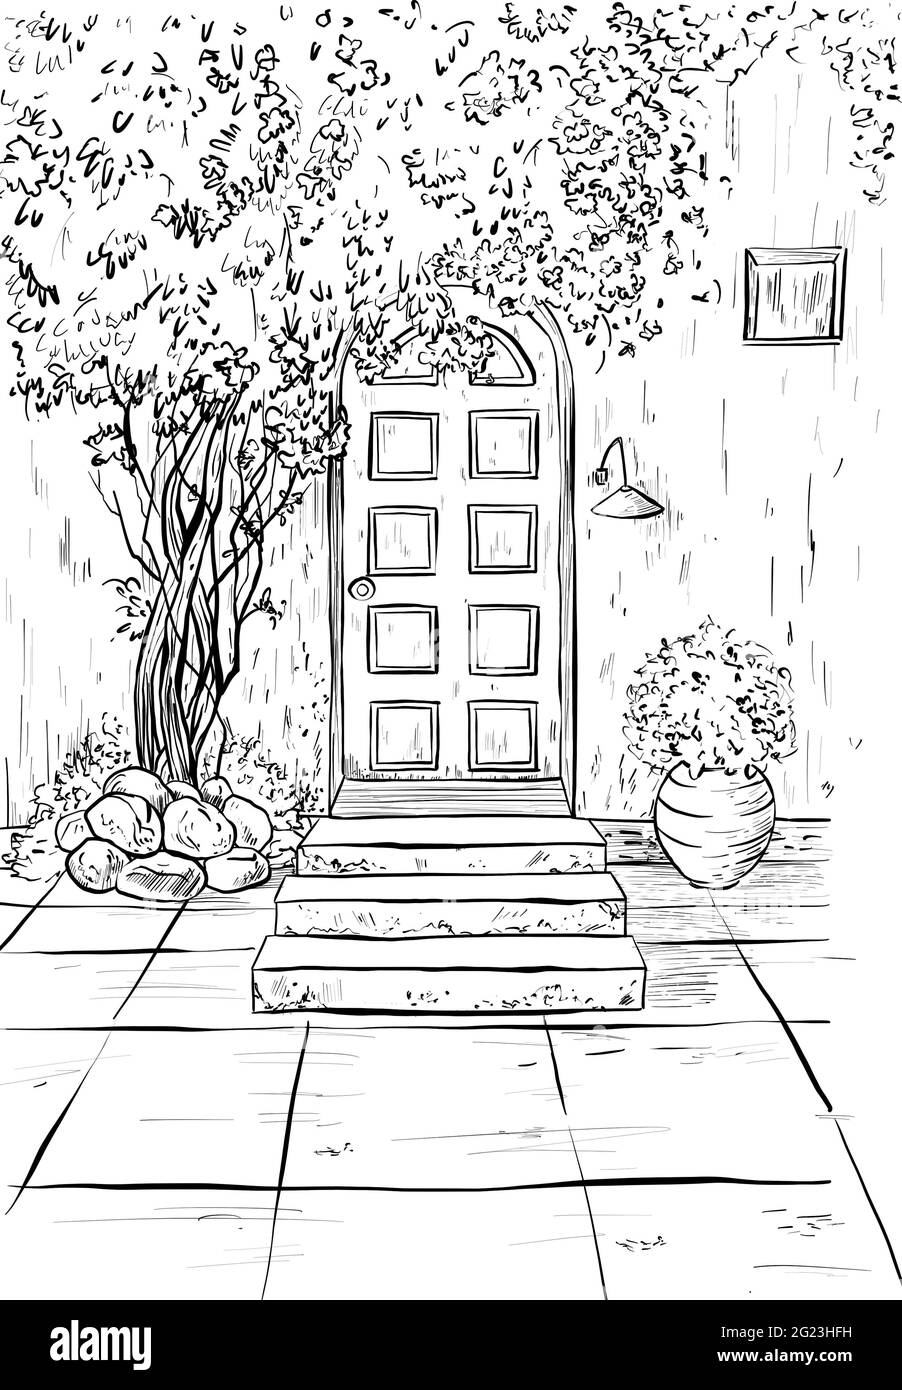 Coloring page book for adult and children with rural exterior Stock Photo